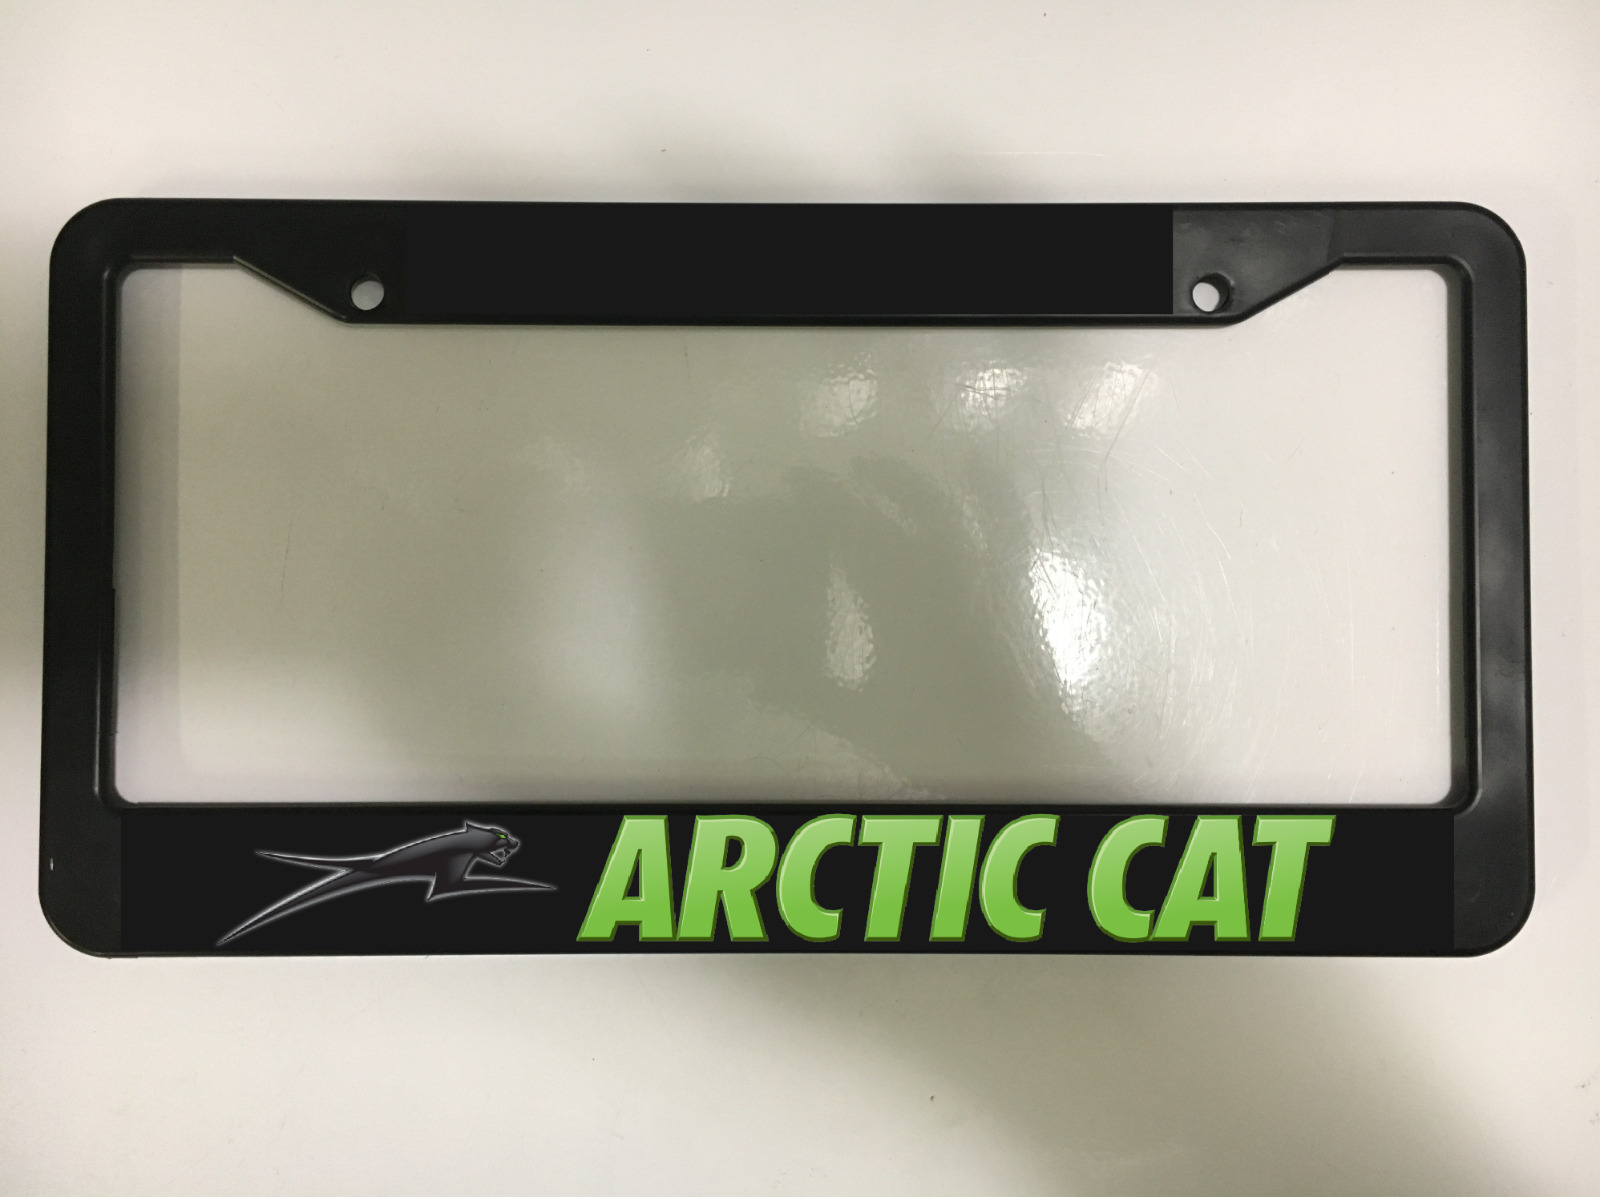 ARCTIC CAT SNOWMOBILE Snowmobiling Snow motor sled Black License Plate Frame NEW